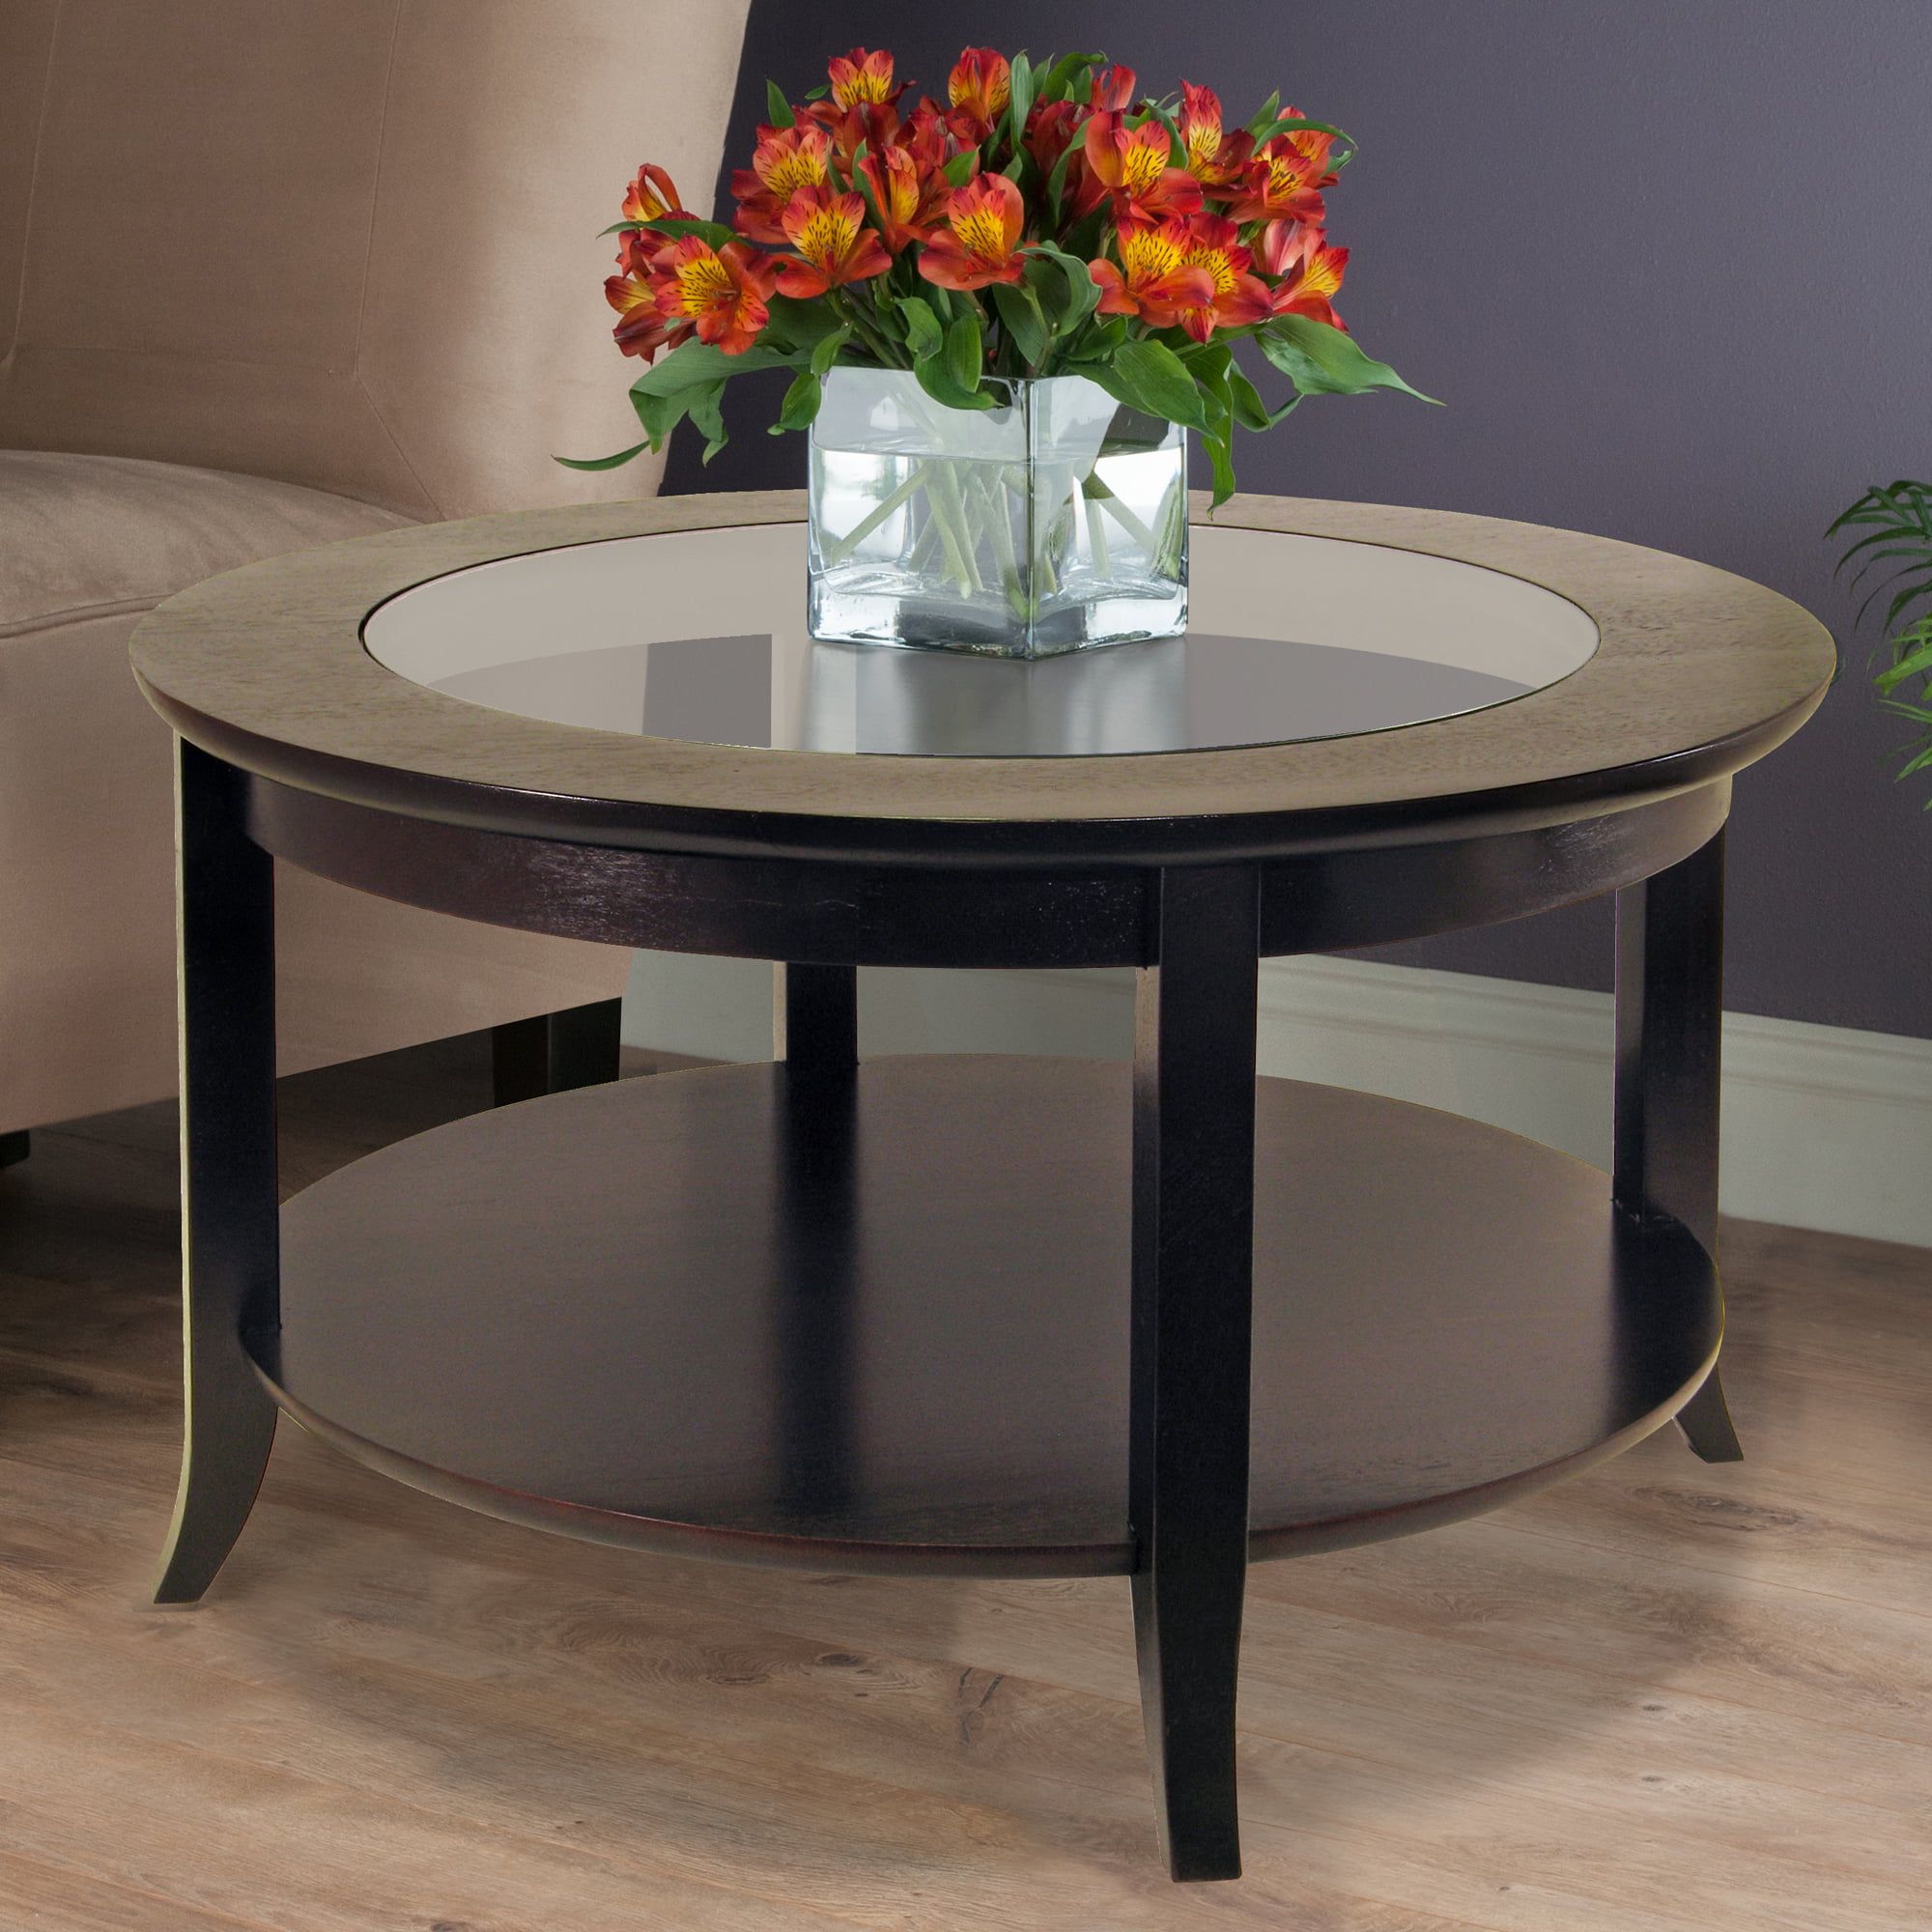 Winsome Wood Genoa Round Coffee Table With Glass Top, Espresso Finish In Espresso Wood Finish Coffee Tables (Gallery 1 of 21)